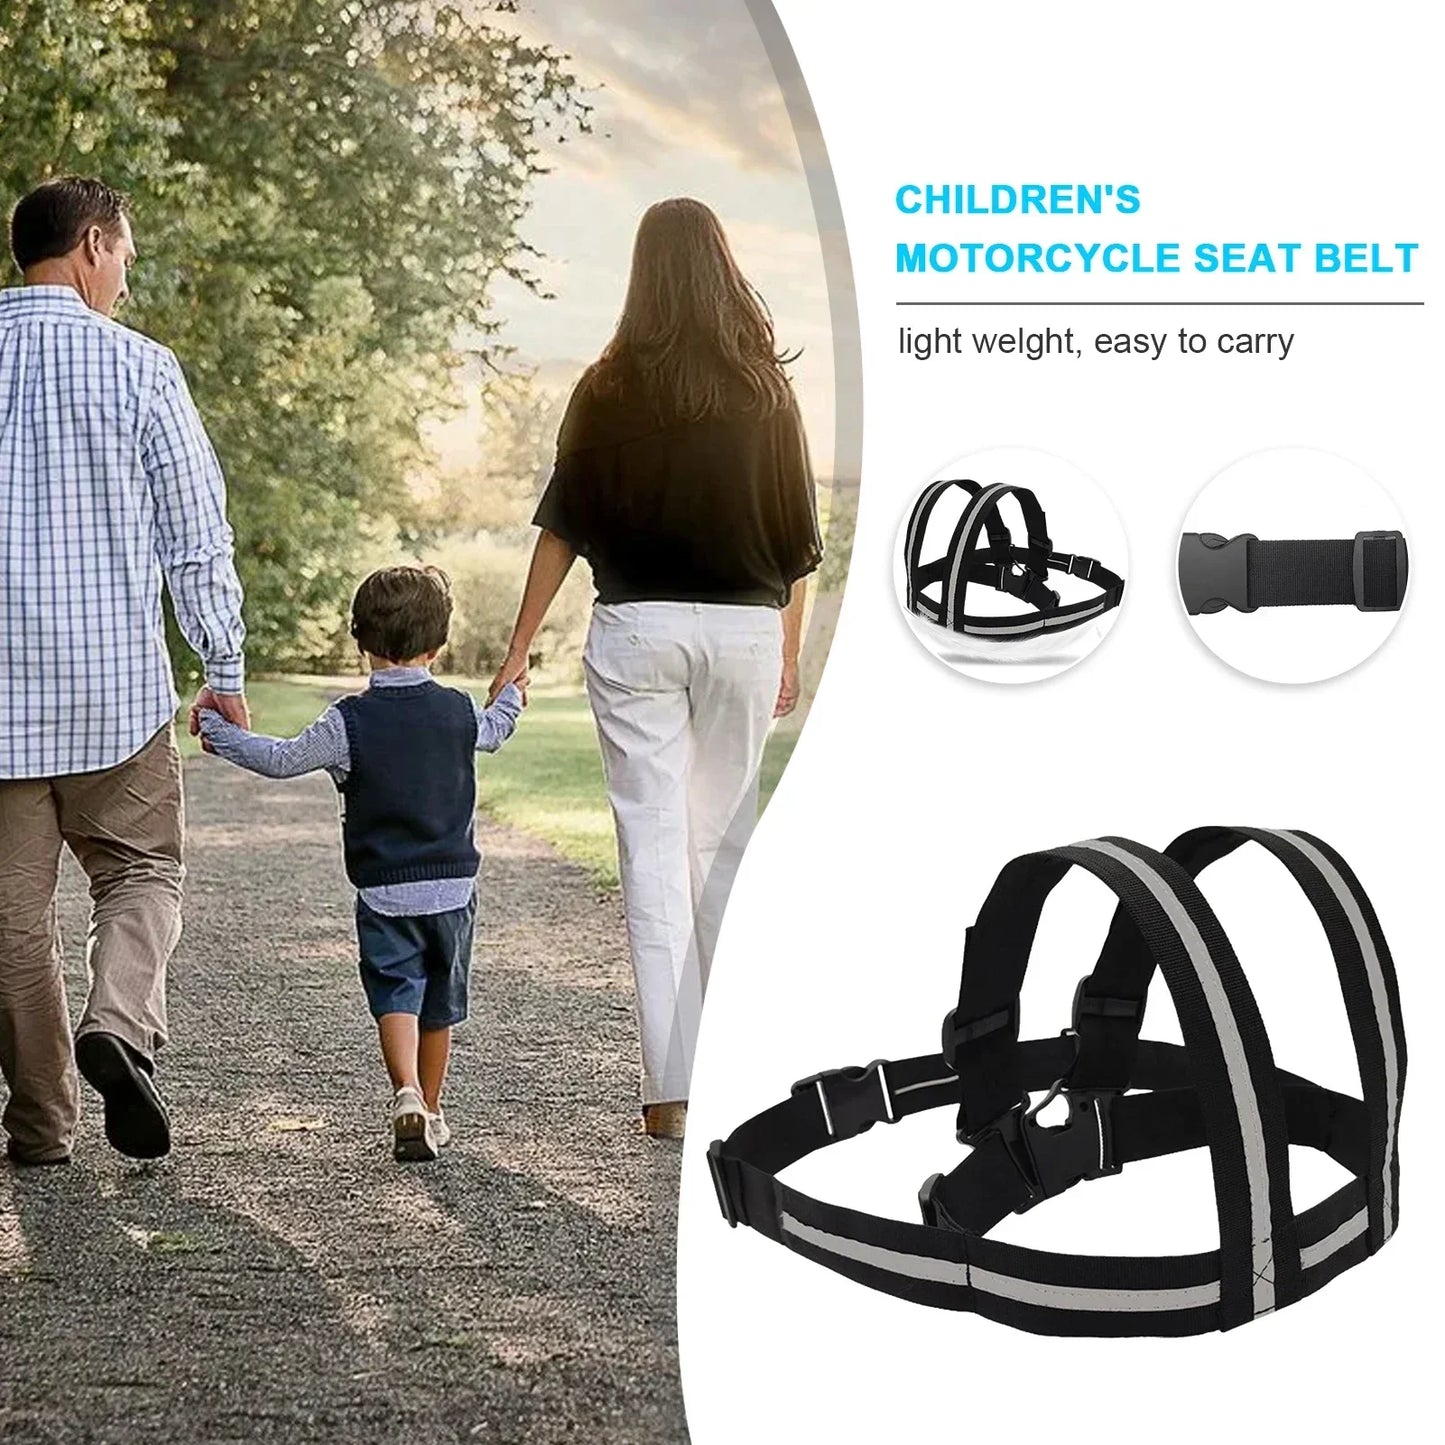 High-Strength Kids Motorcycle and Bike Safety Harness - Adjustable Child Safety Seat Belt Strap